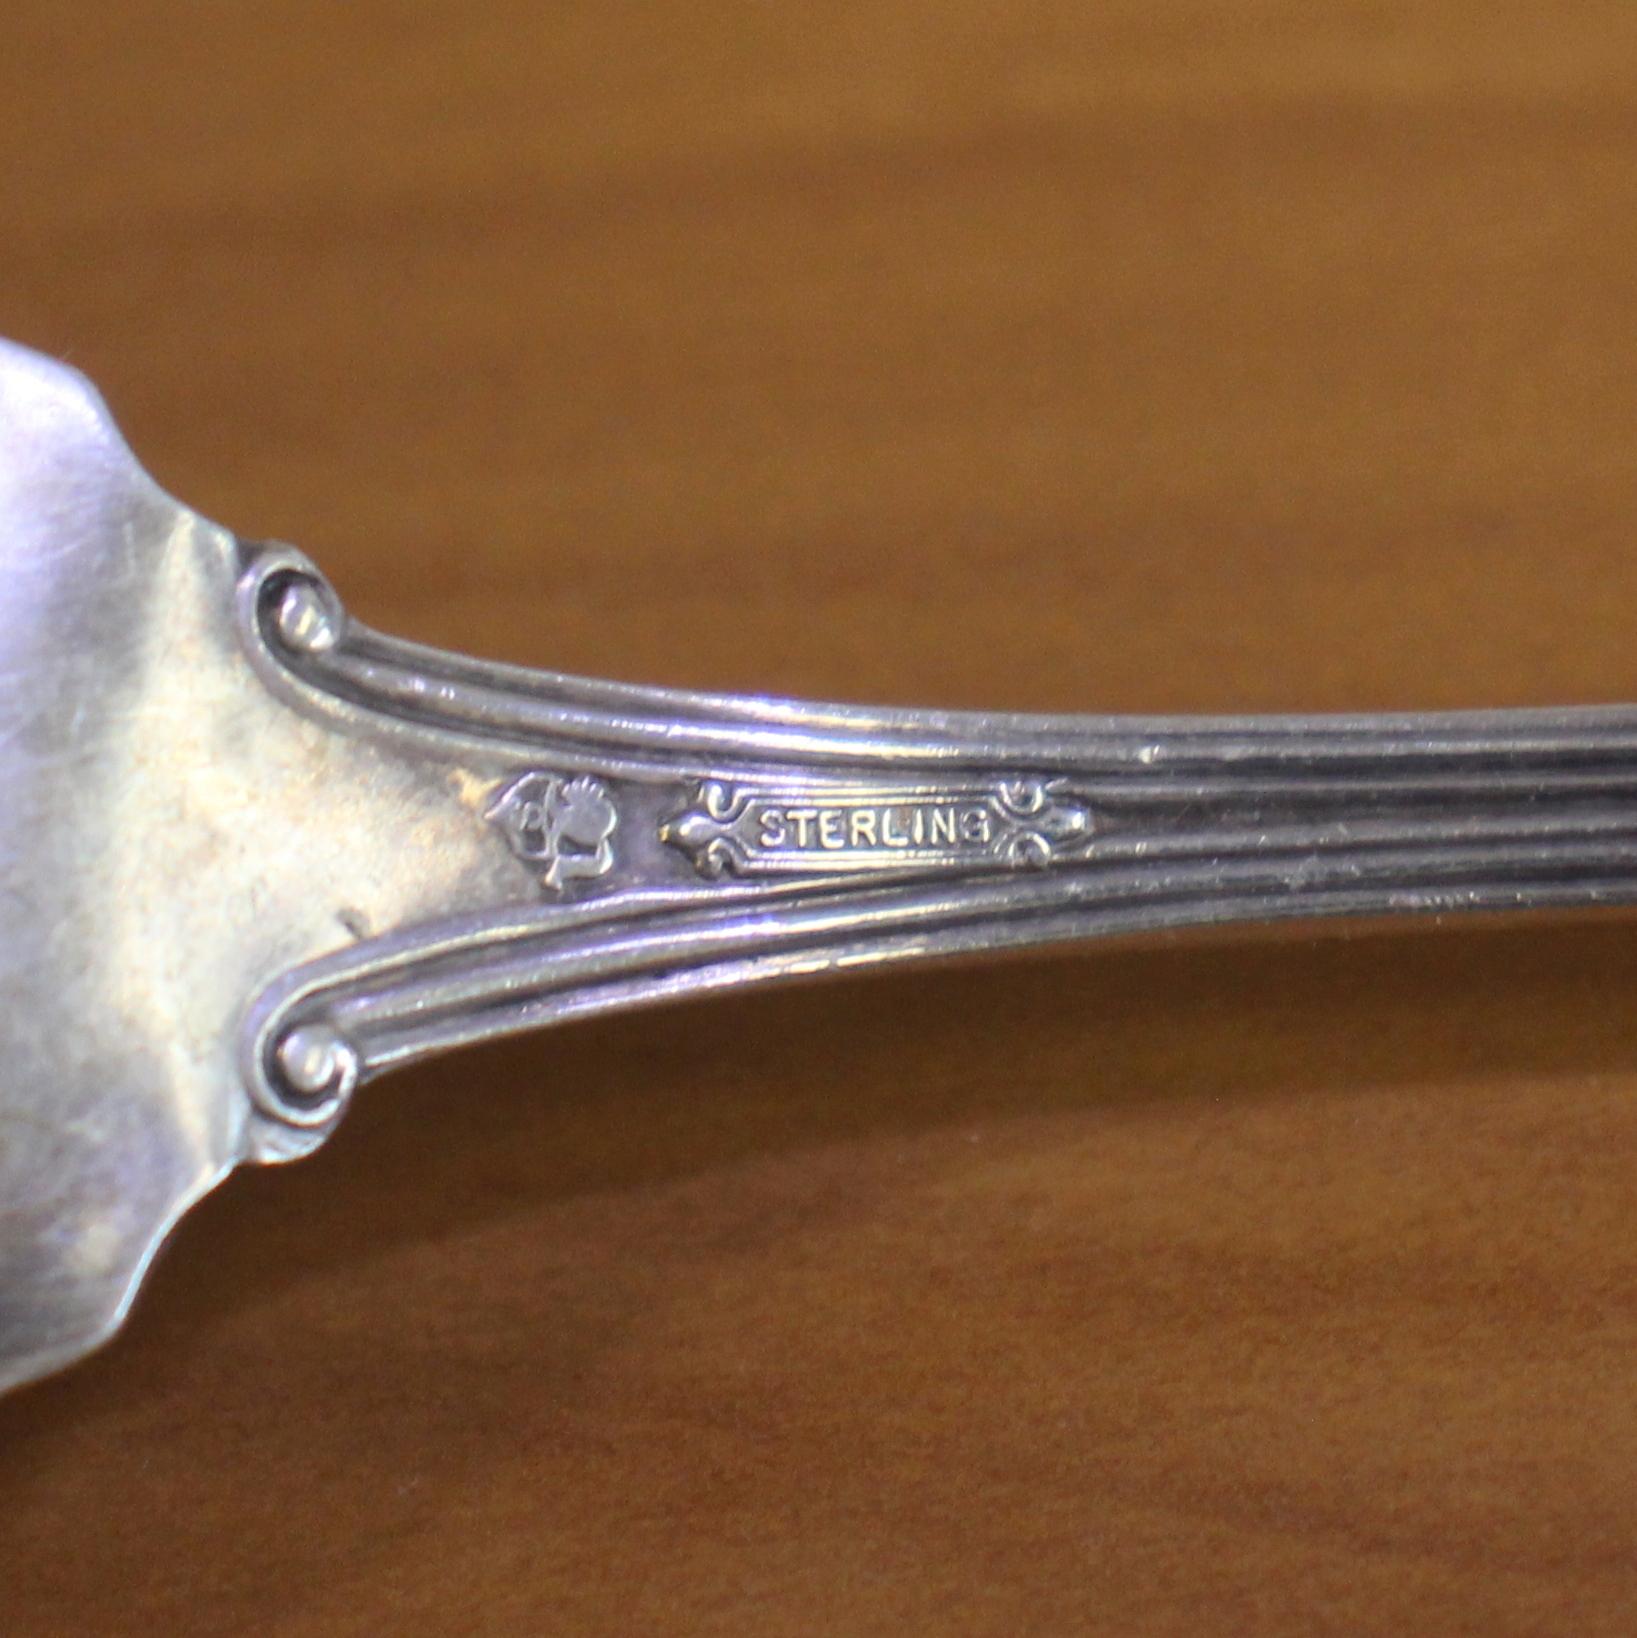 Simpson, Hall, Miller And Co. Cold Meat Fork In .925 Sterling Silver